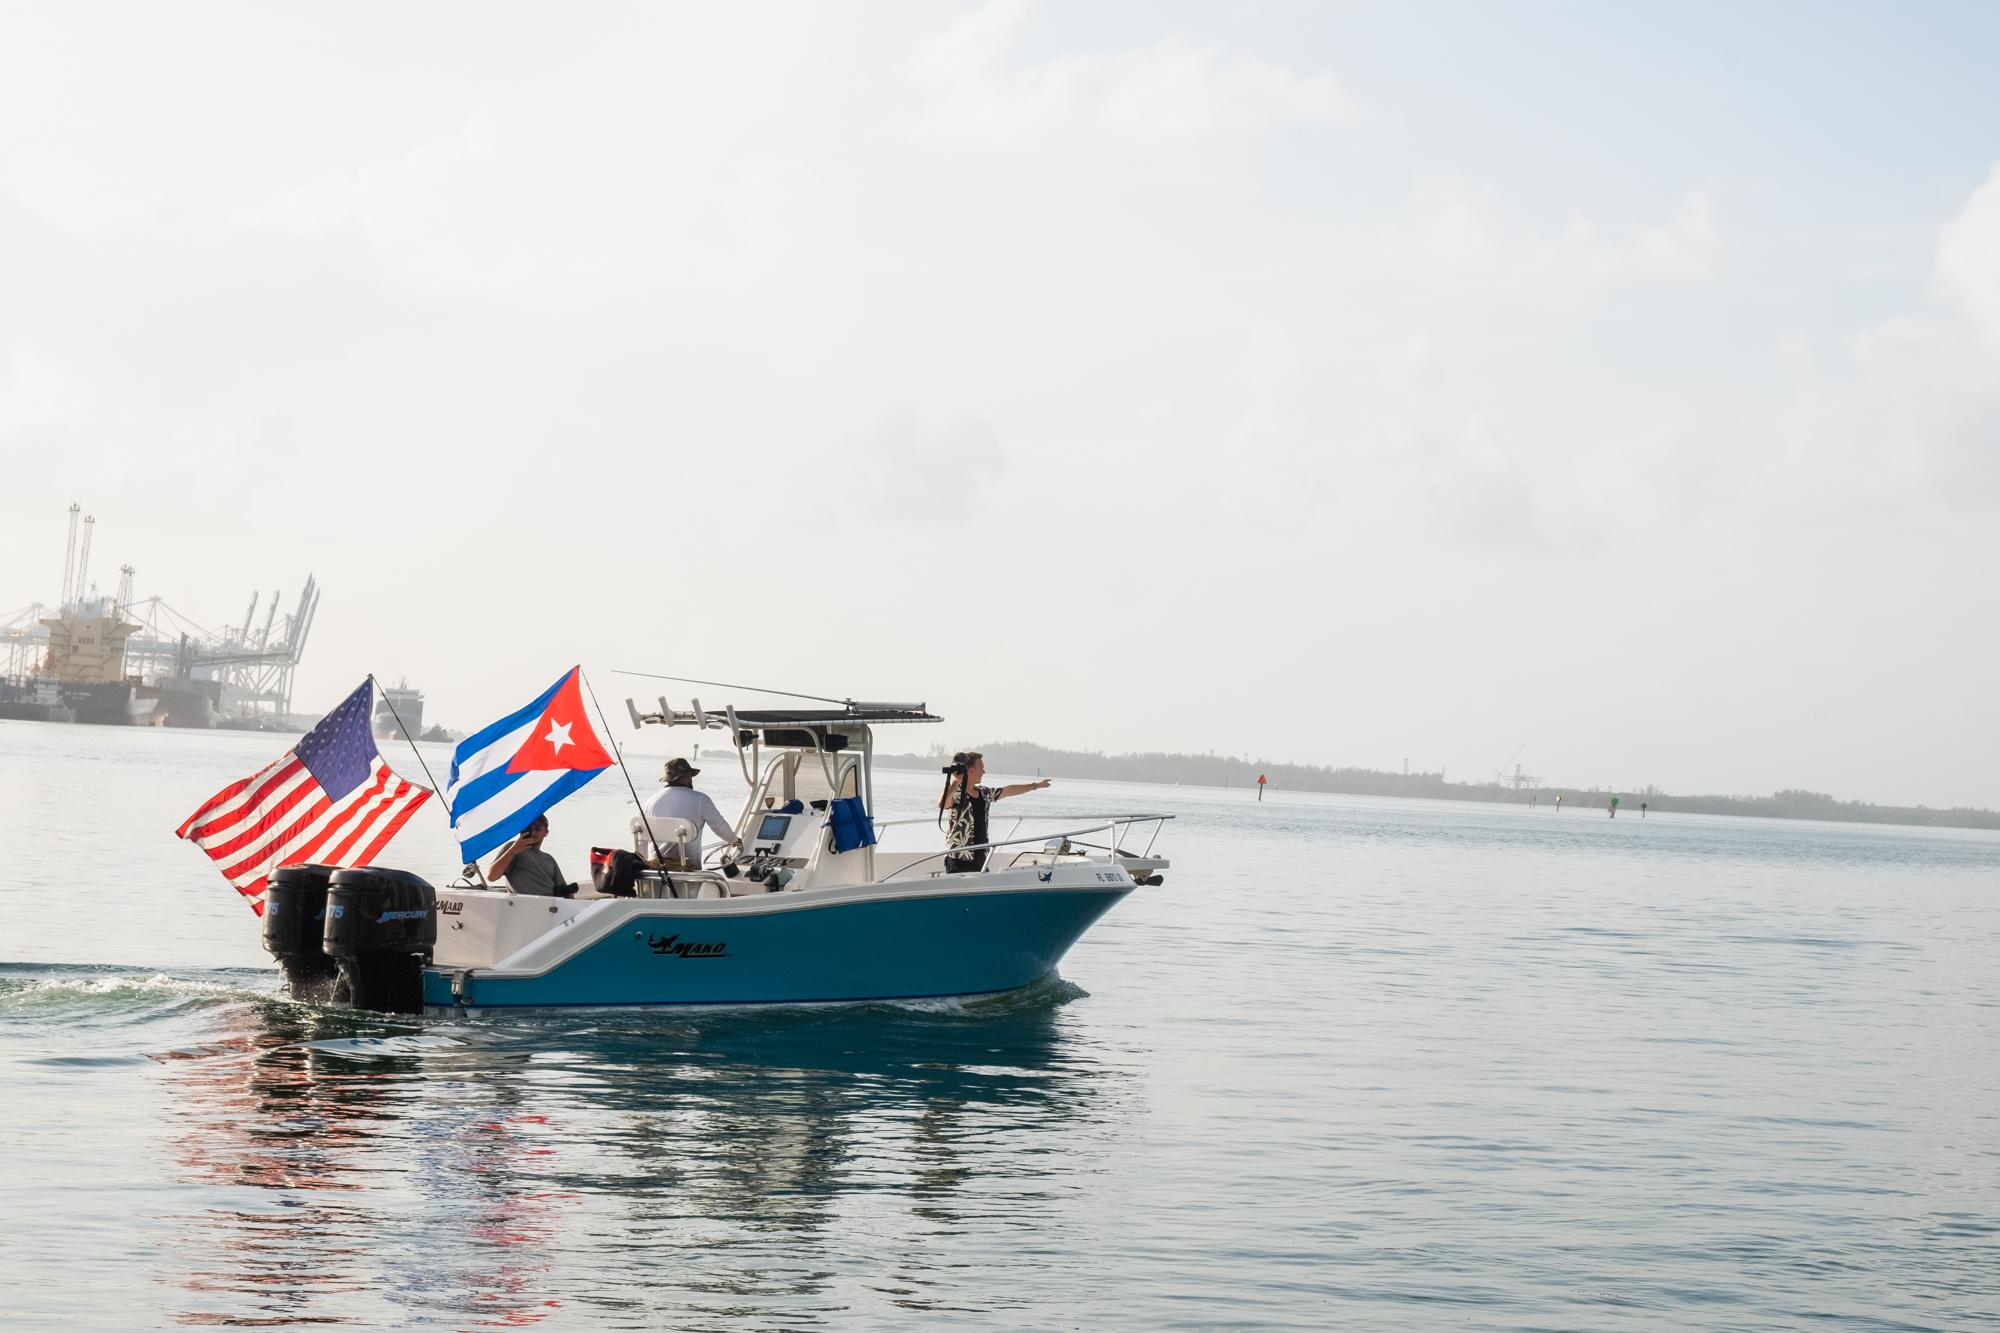  Flotilla organizer, Alain (boat captain), and his crew departed the Bayside dock on their way to Cuba in solidarity with the ongoing protests....